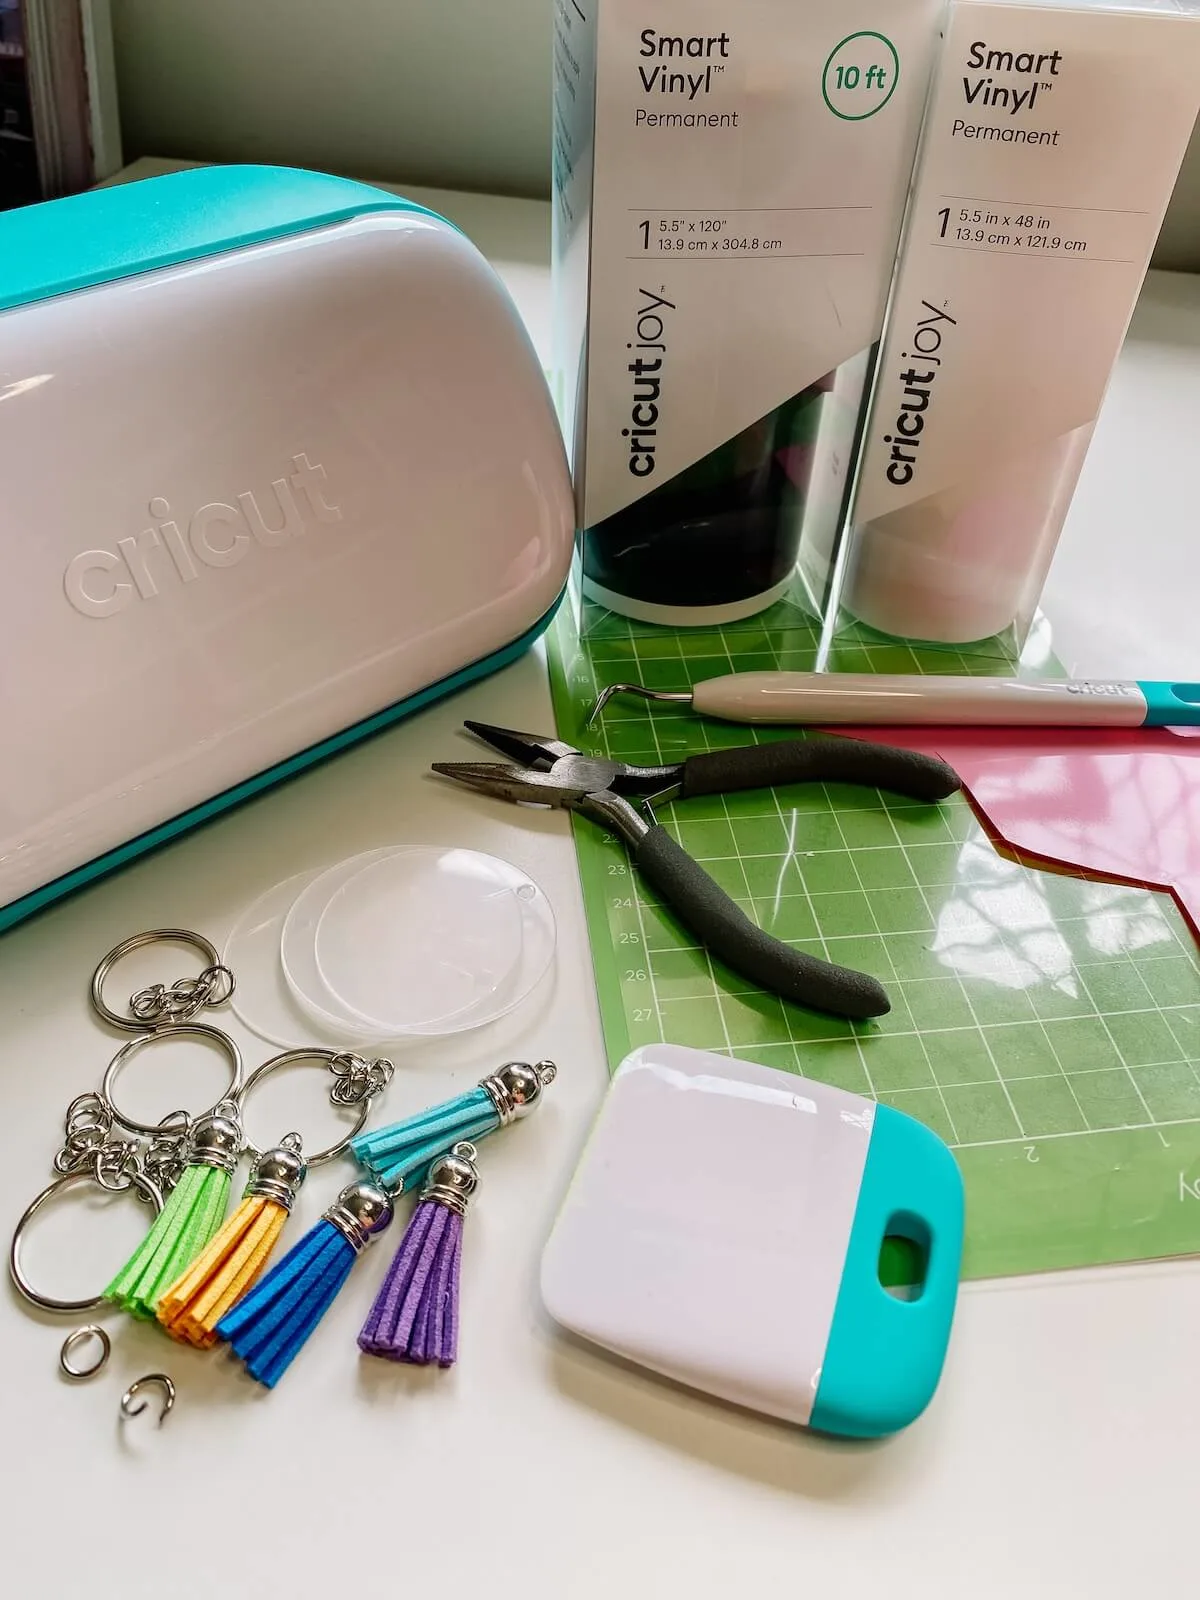 Cricut joy and materials needed to make personalised keychains.